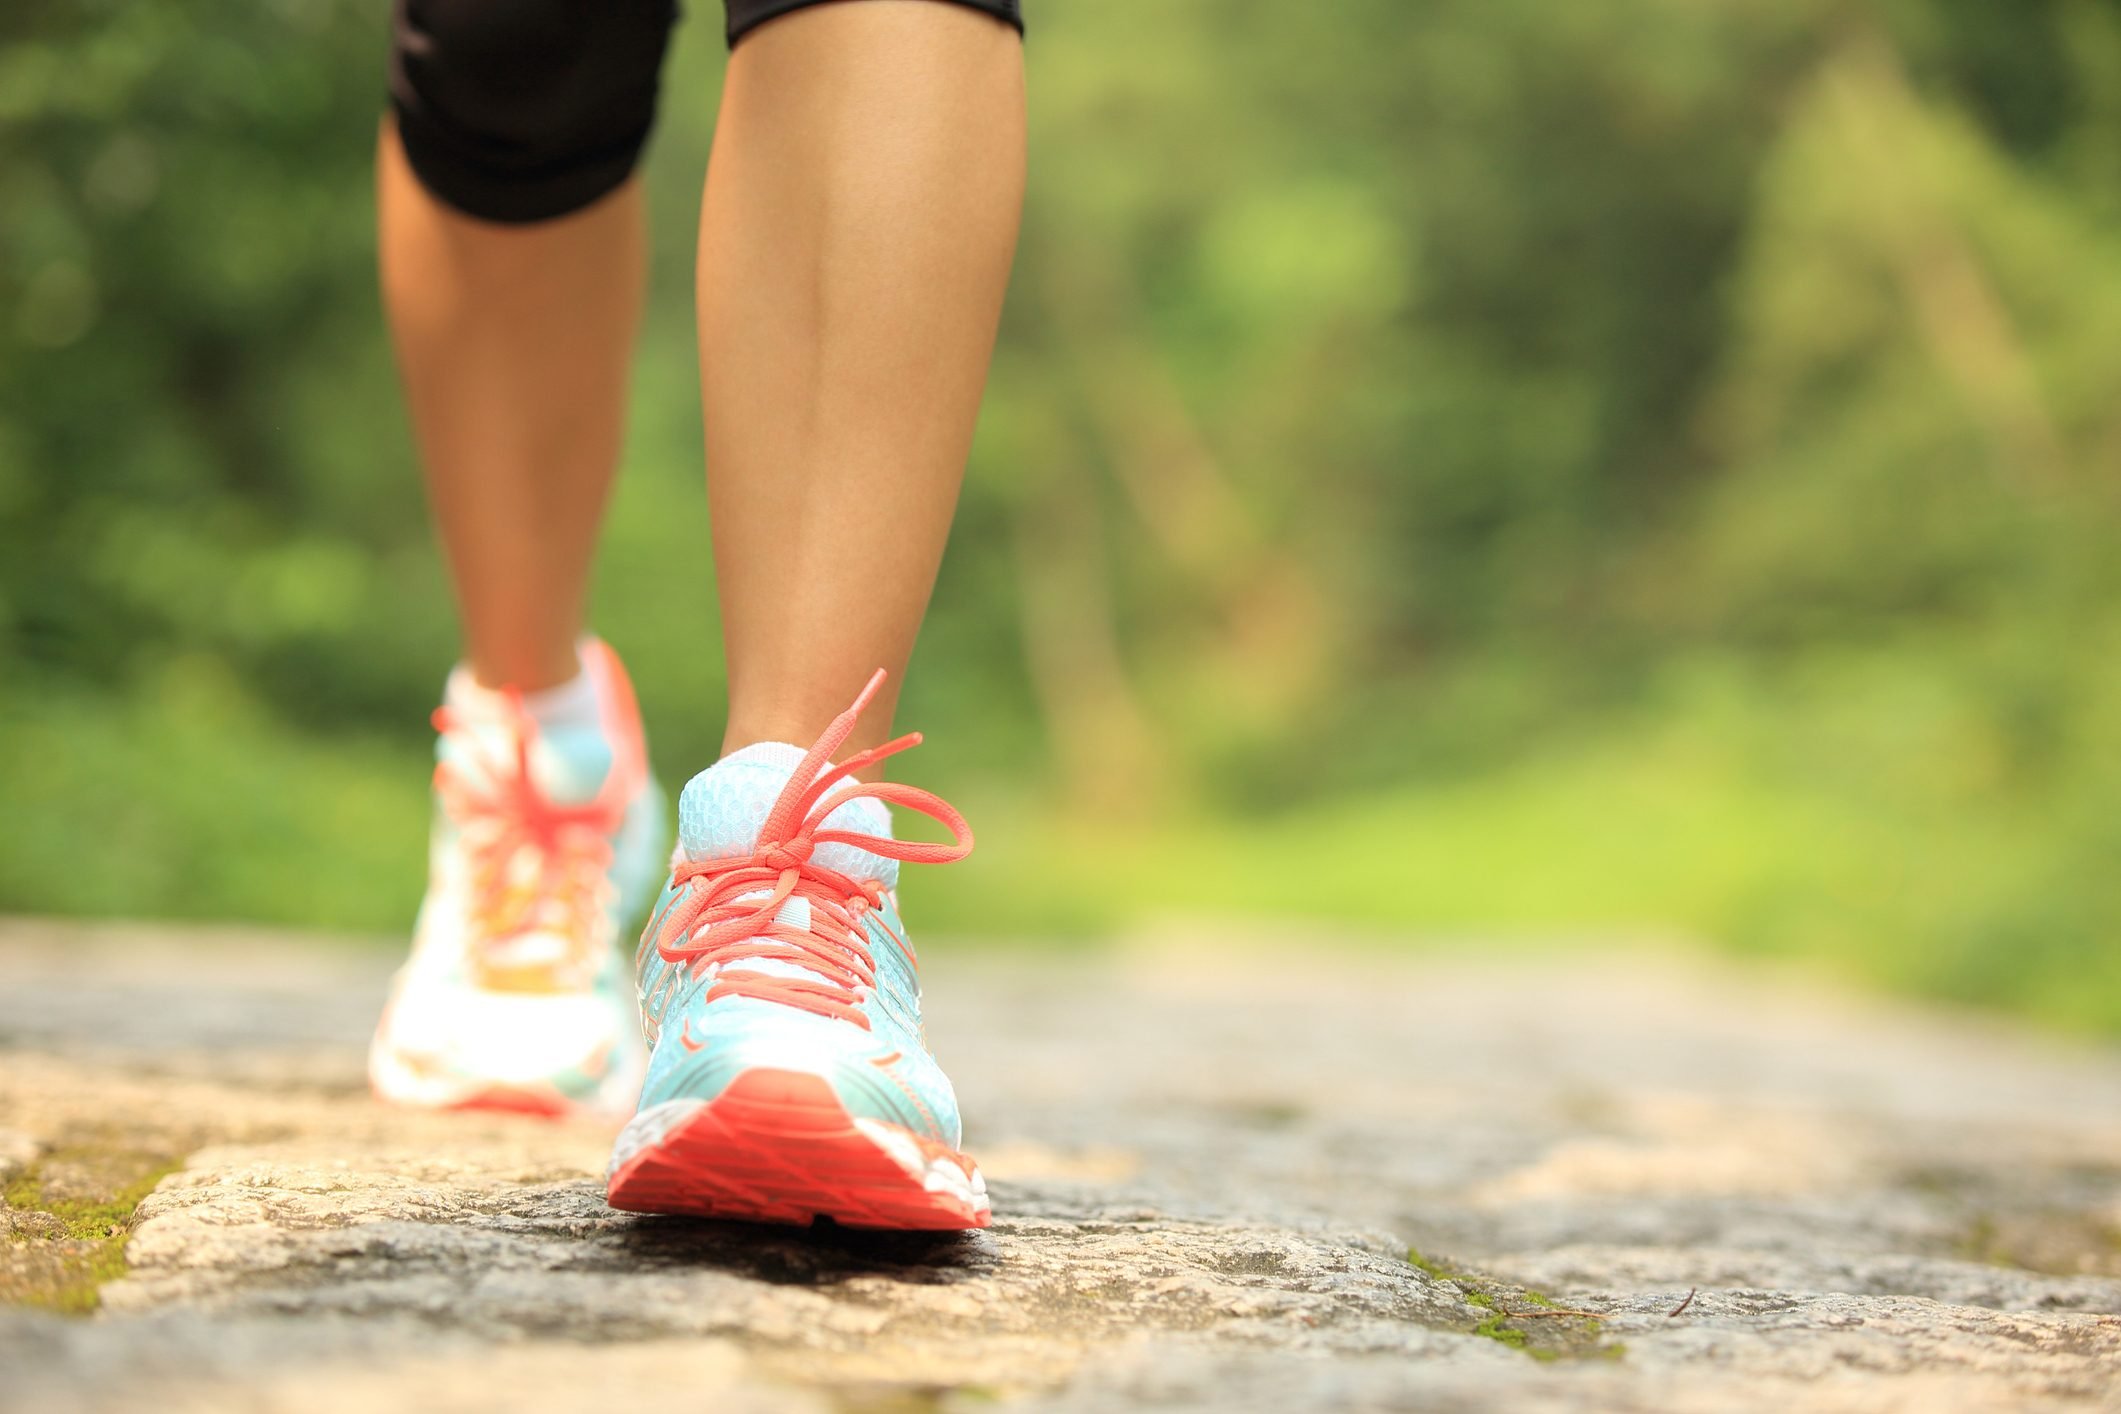 The Best Walking Shoes For Flat Feet, According To A Podiatrist